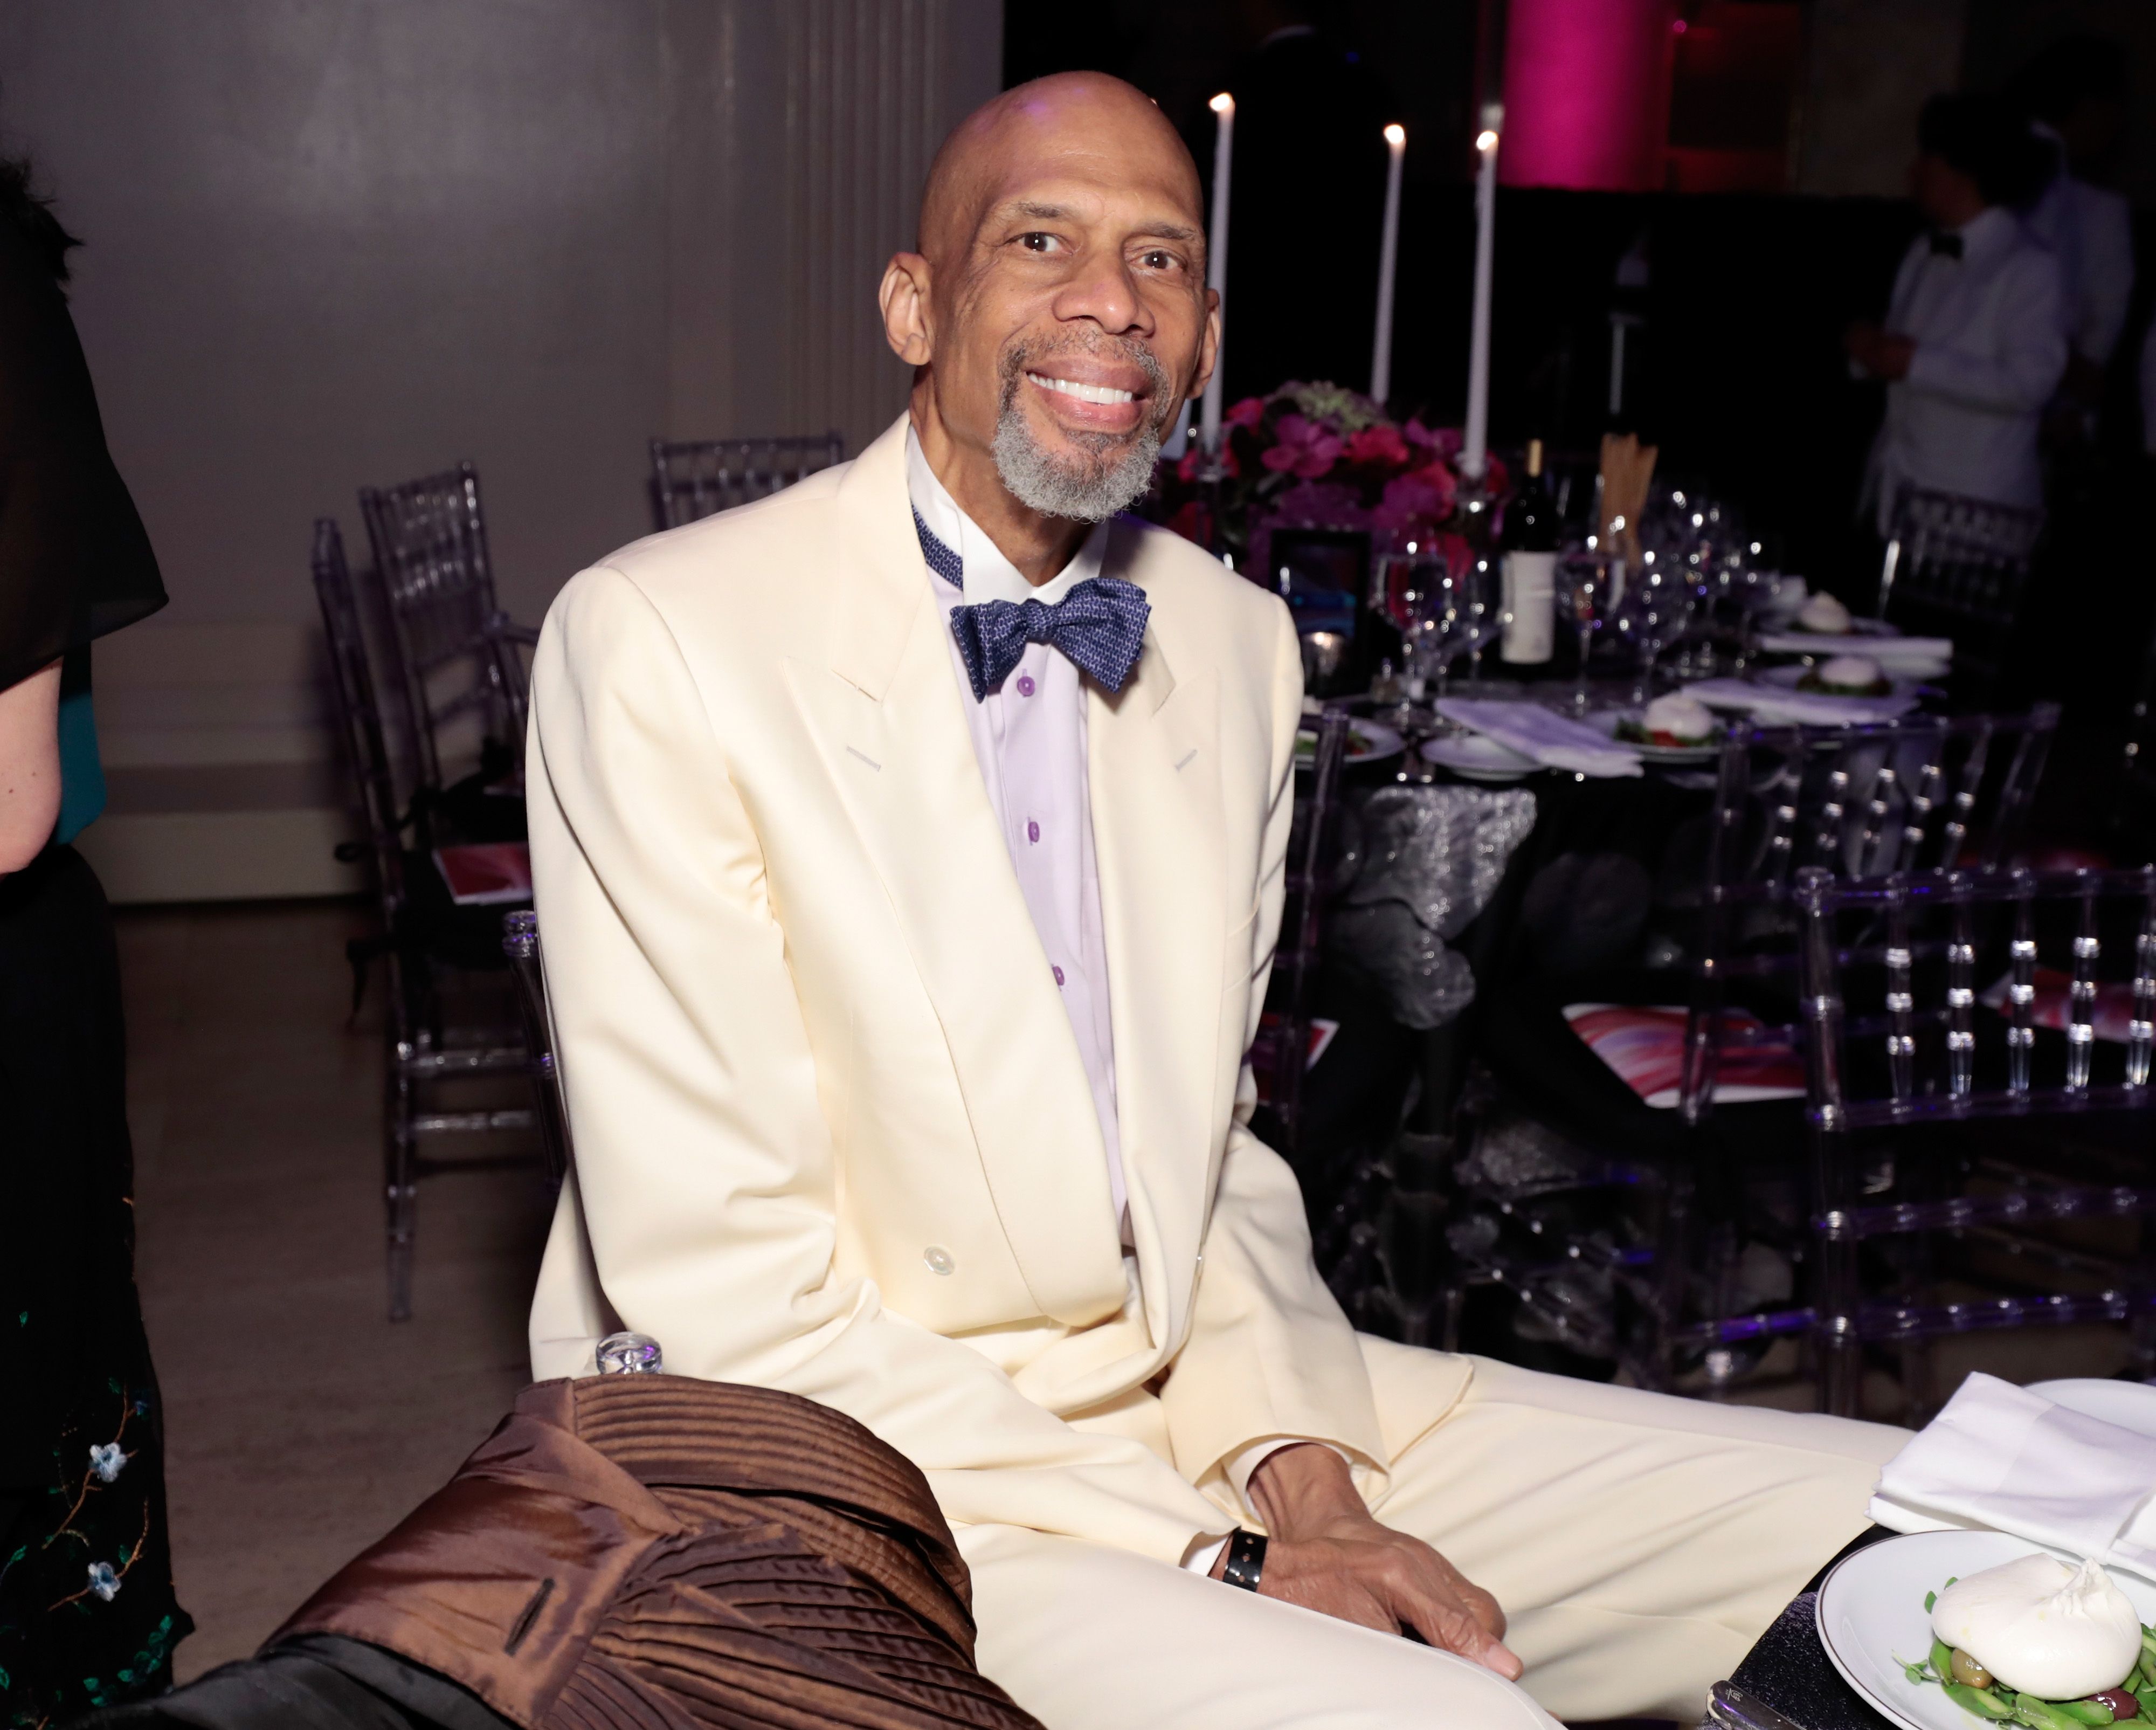 Kareem Abdul-Jabbar at Gabrielle's Angel Foundation's Angel Ball 2017 in New York City. | Source: Getty Images